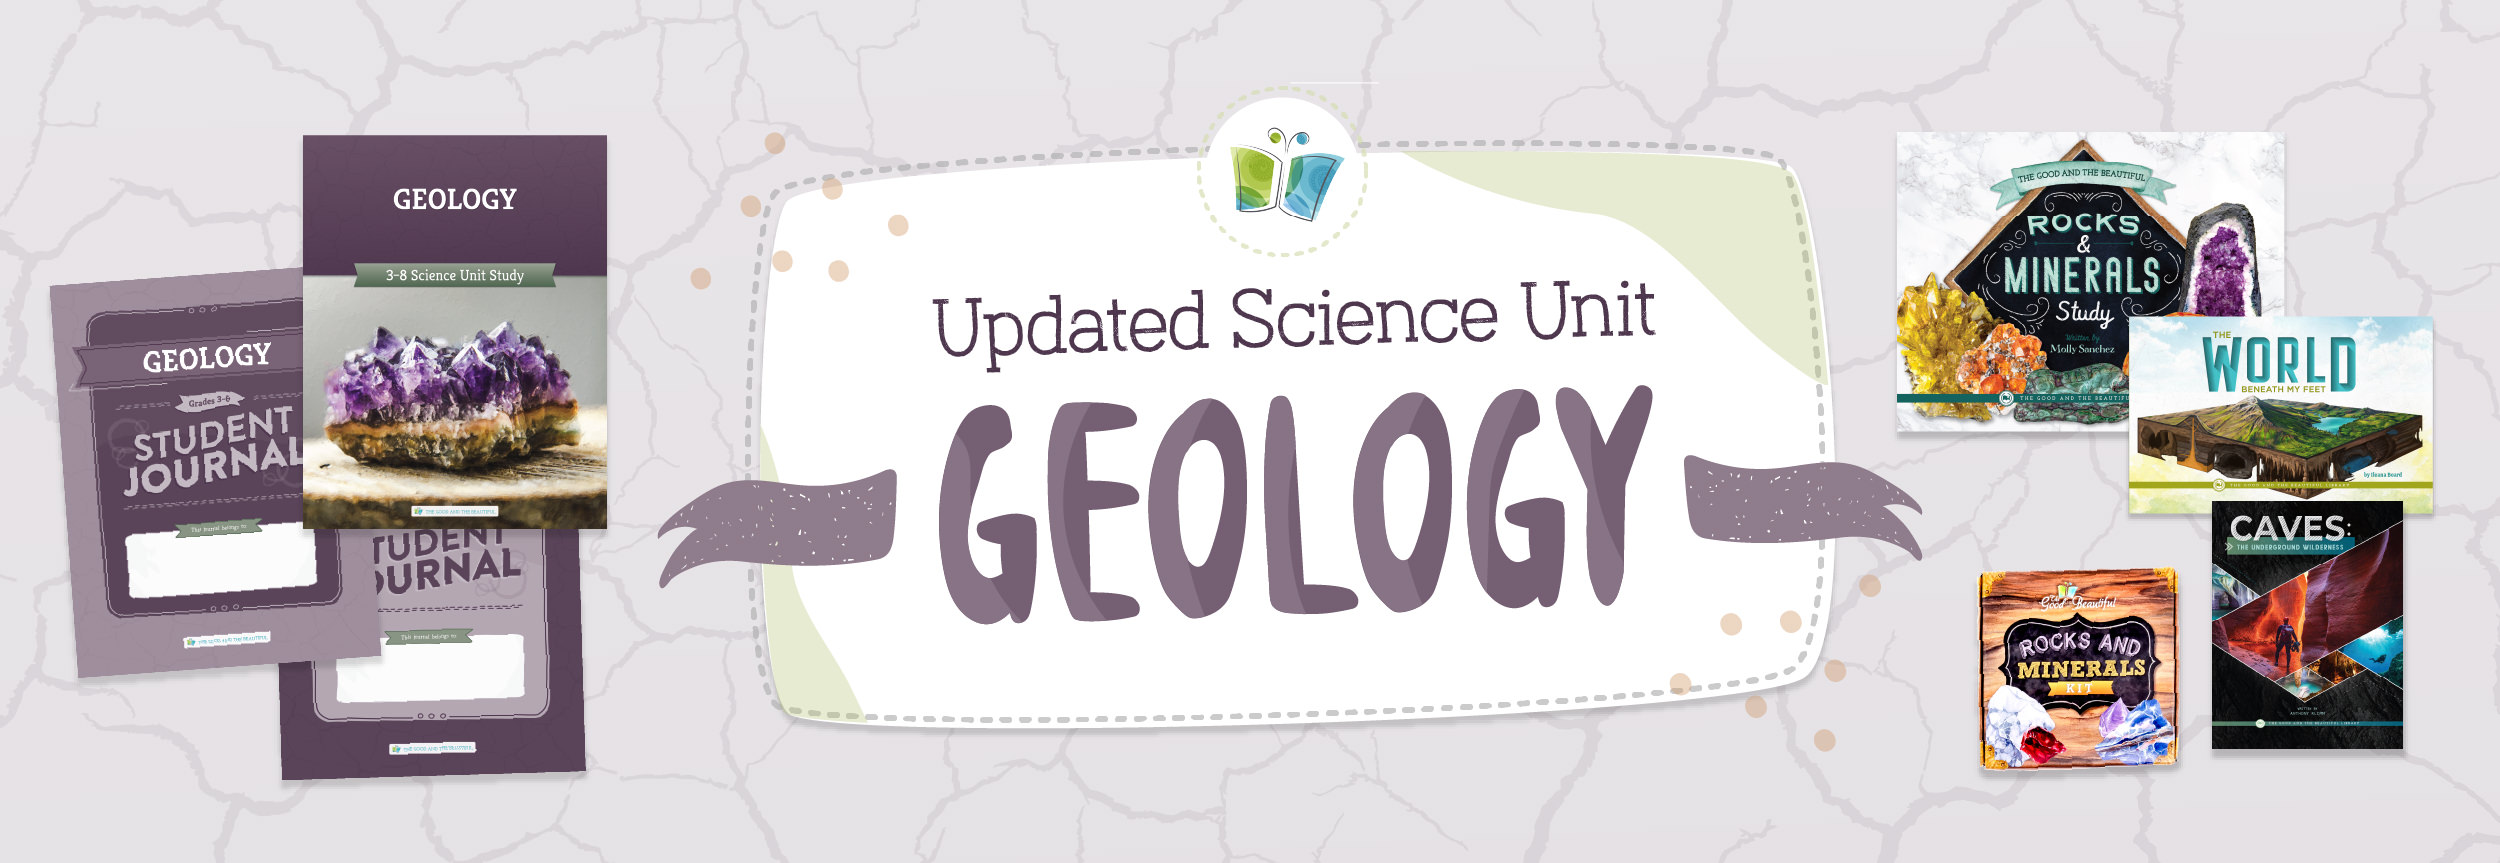 GEOLOGY !70 Updated Science Unit GEOLOGY qpor.oe? 